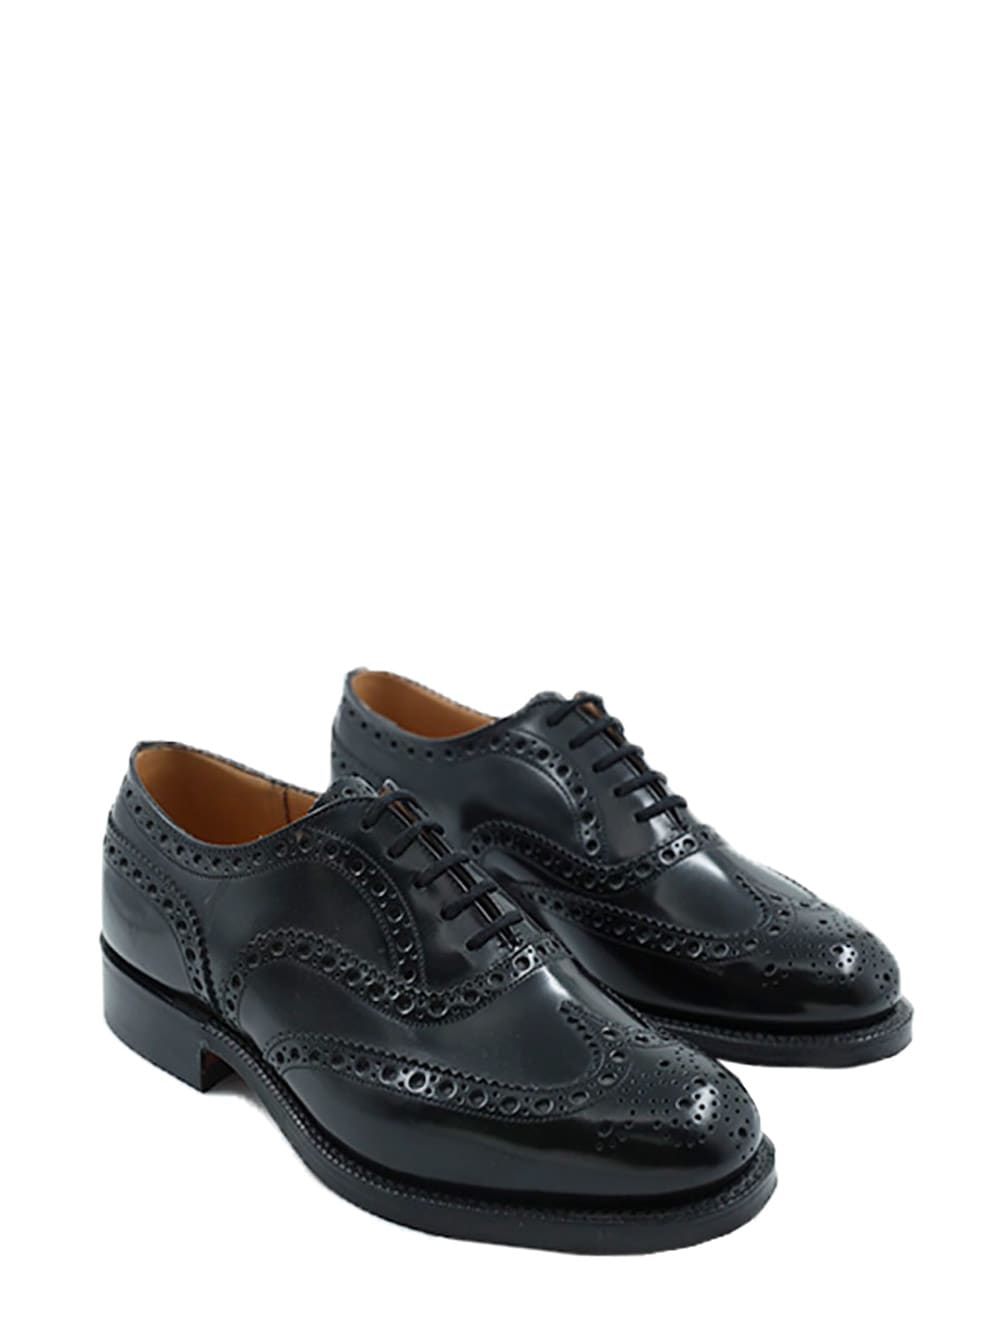 Full Brogue Lace-up Oxford